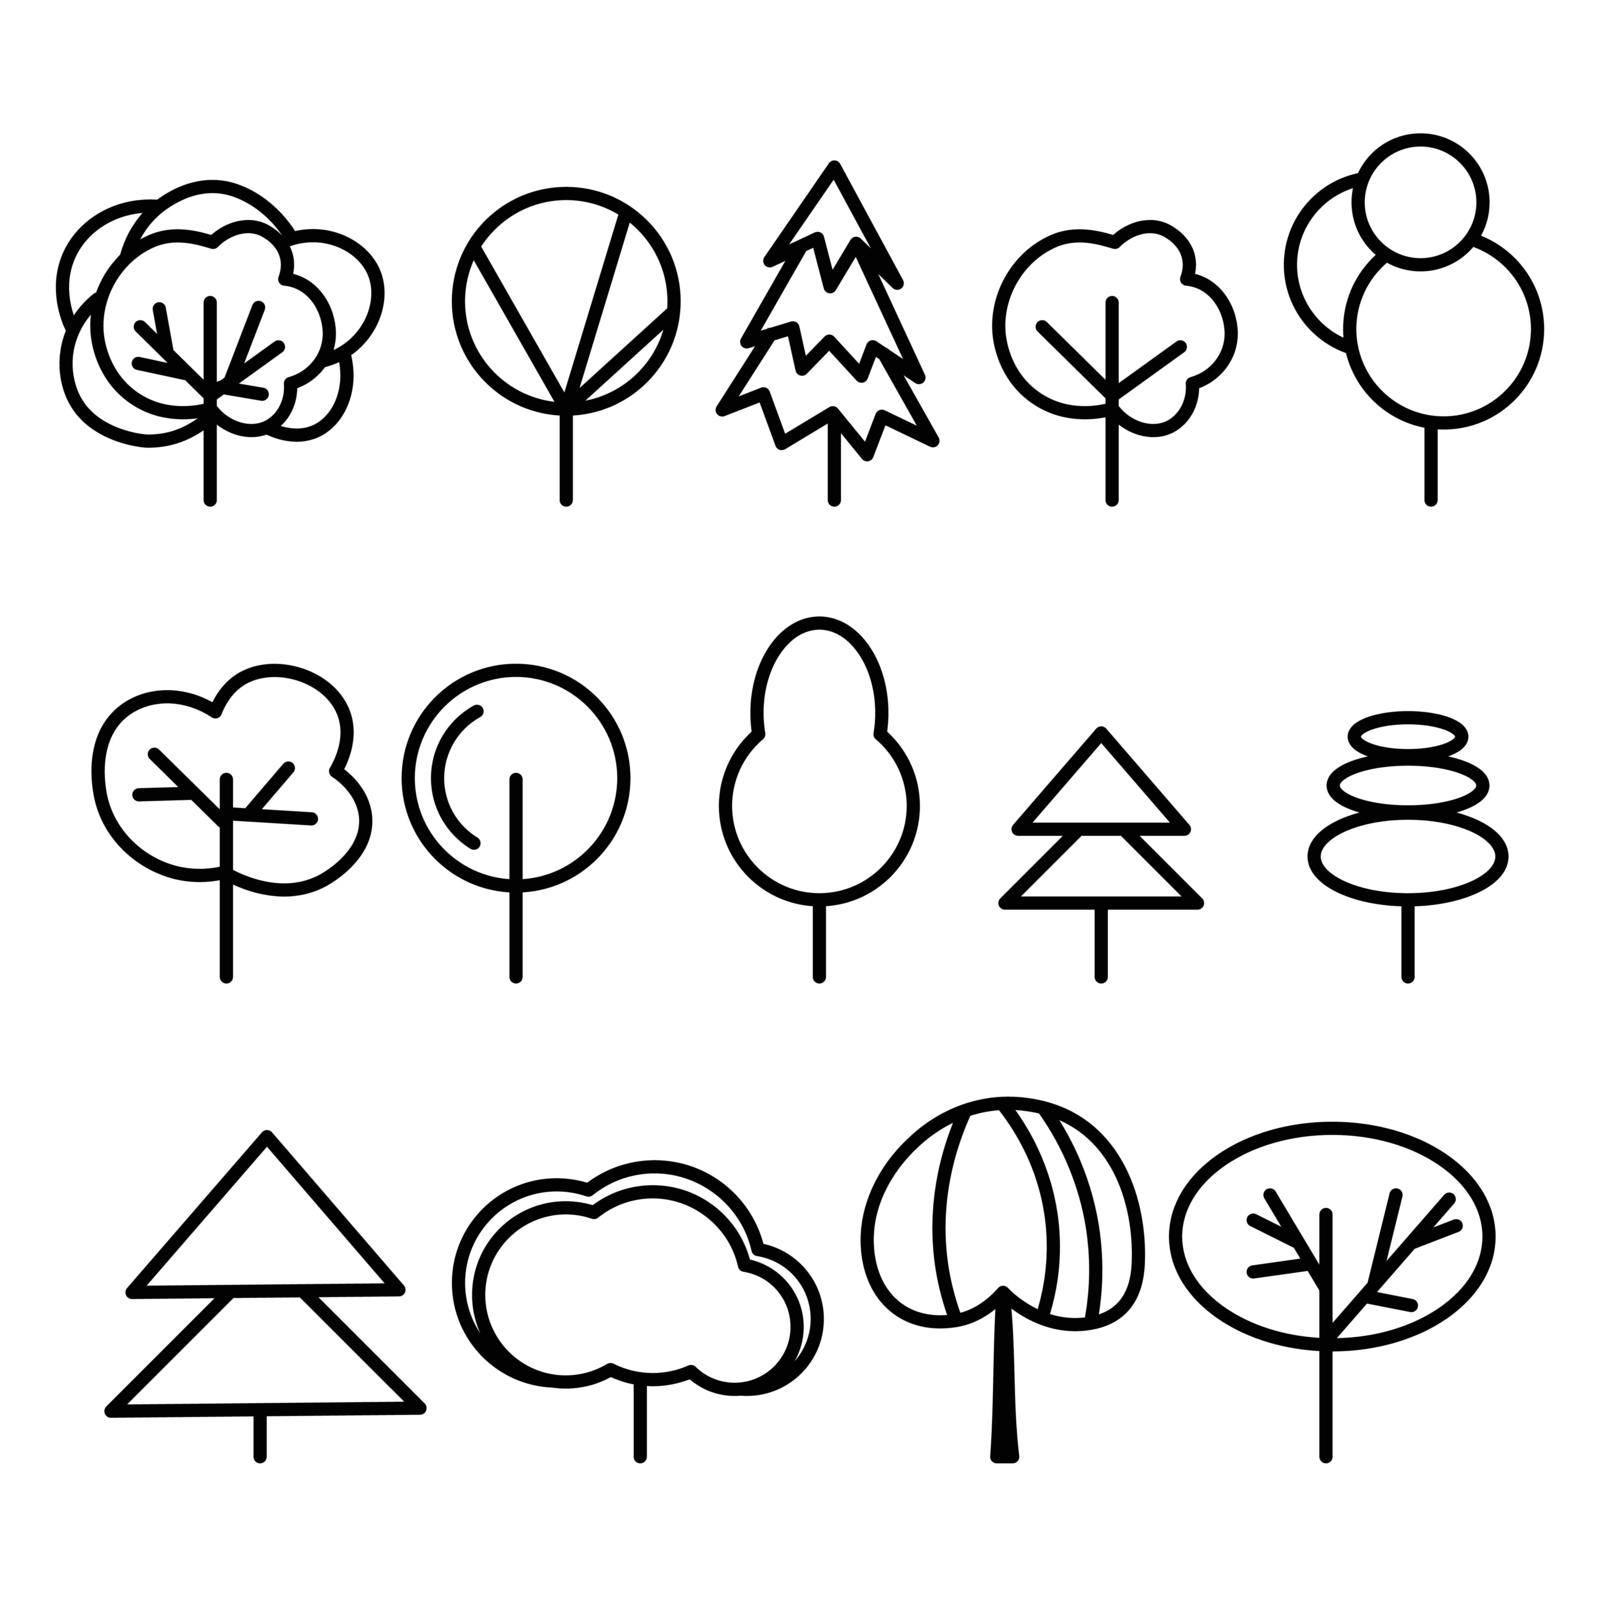 Set with back and white template tree, fir tree icon. Vector symbol sign isolated on white background. Trees flat line icons set. Plants, landscape design. Business idea concept.